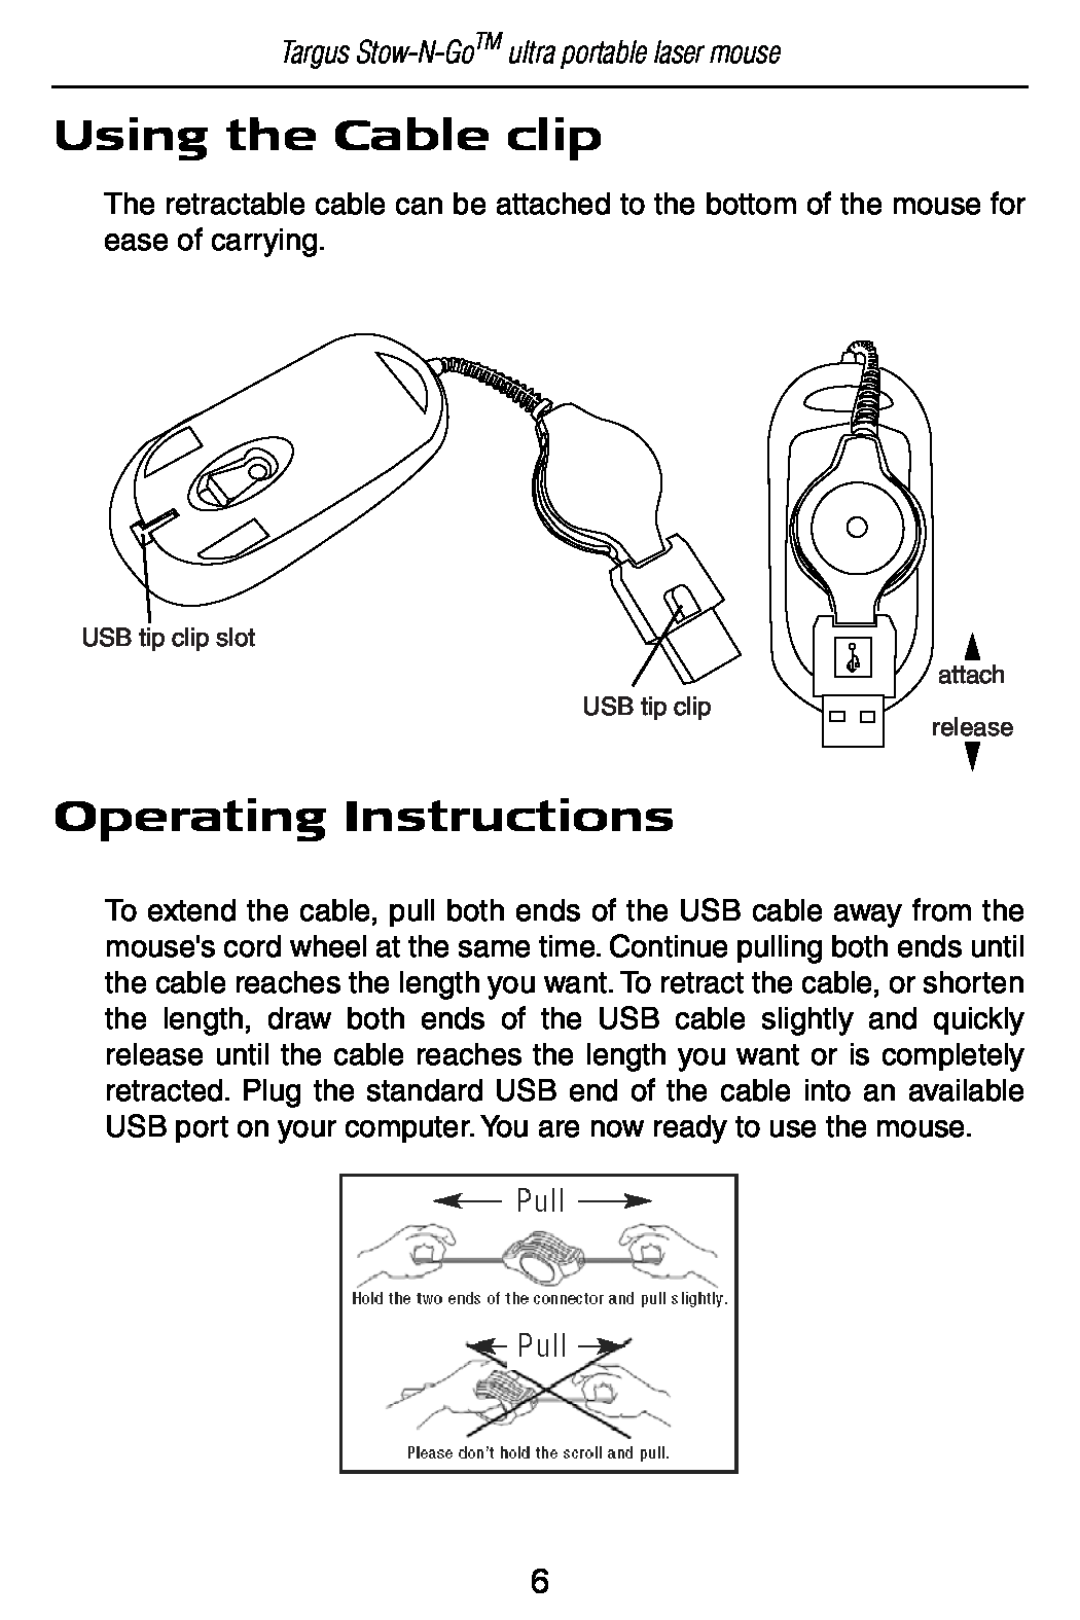 Targus AMU22US Using the Cable clip, Operating Instructions, Targus Stow-N-GoTM ultra portable laser mouse, attach release 